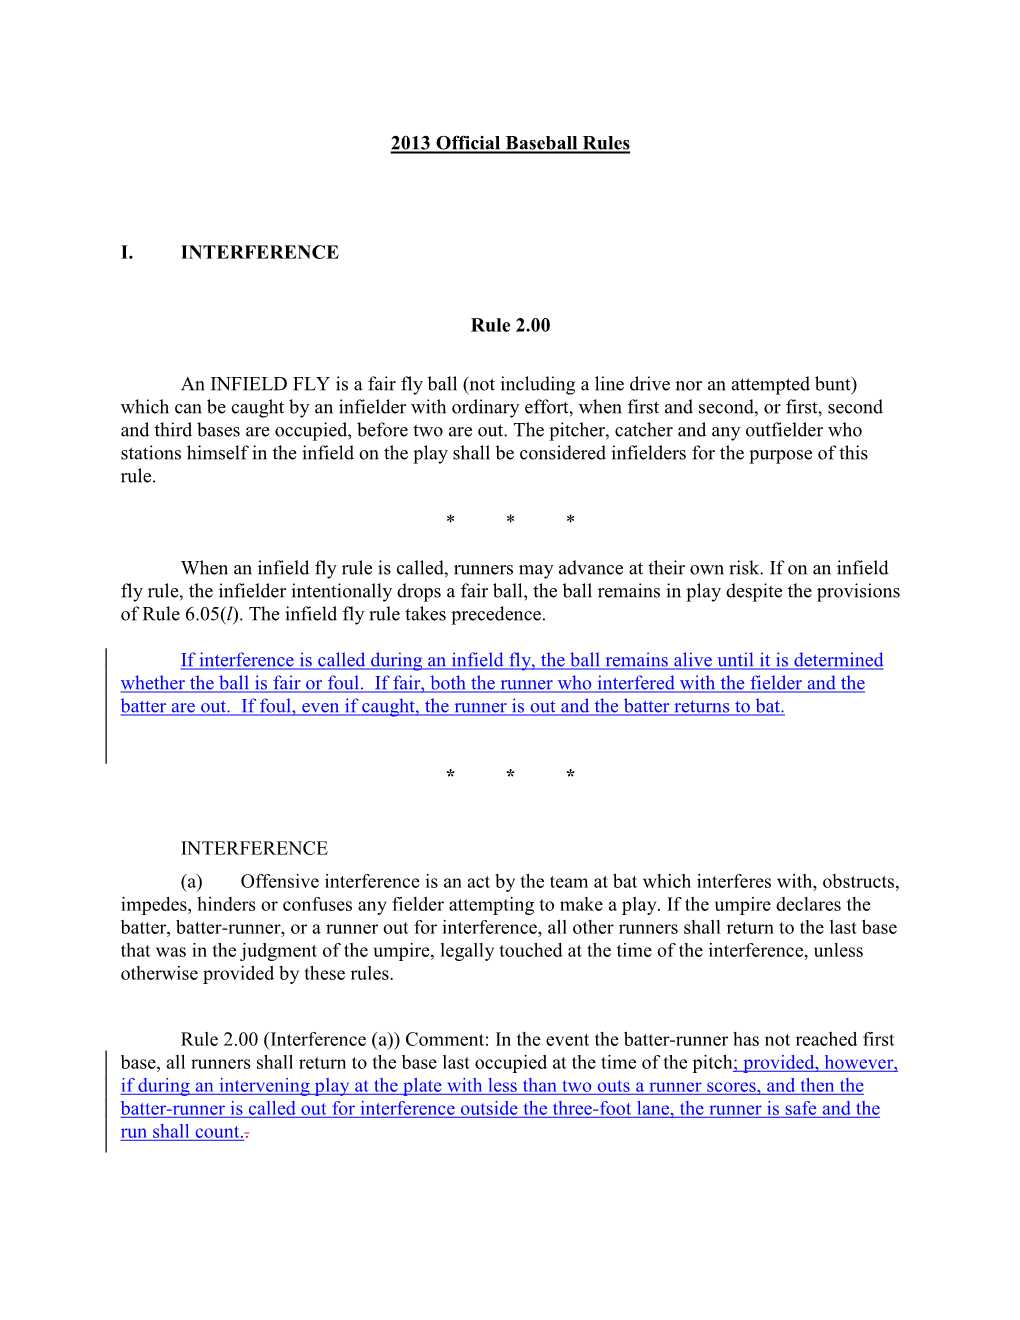 2013 Official Baseball Rules I. INTERFERENCE Rule 2.00 An